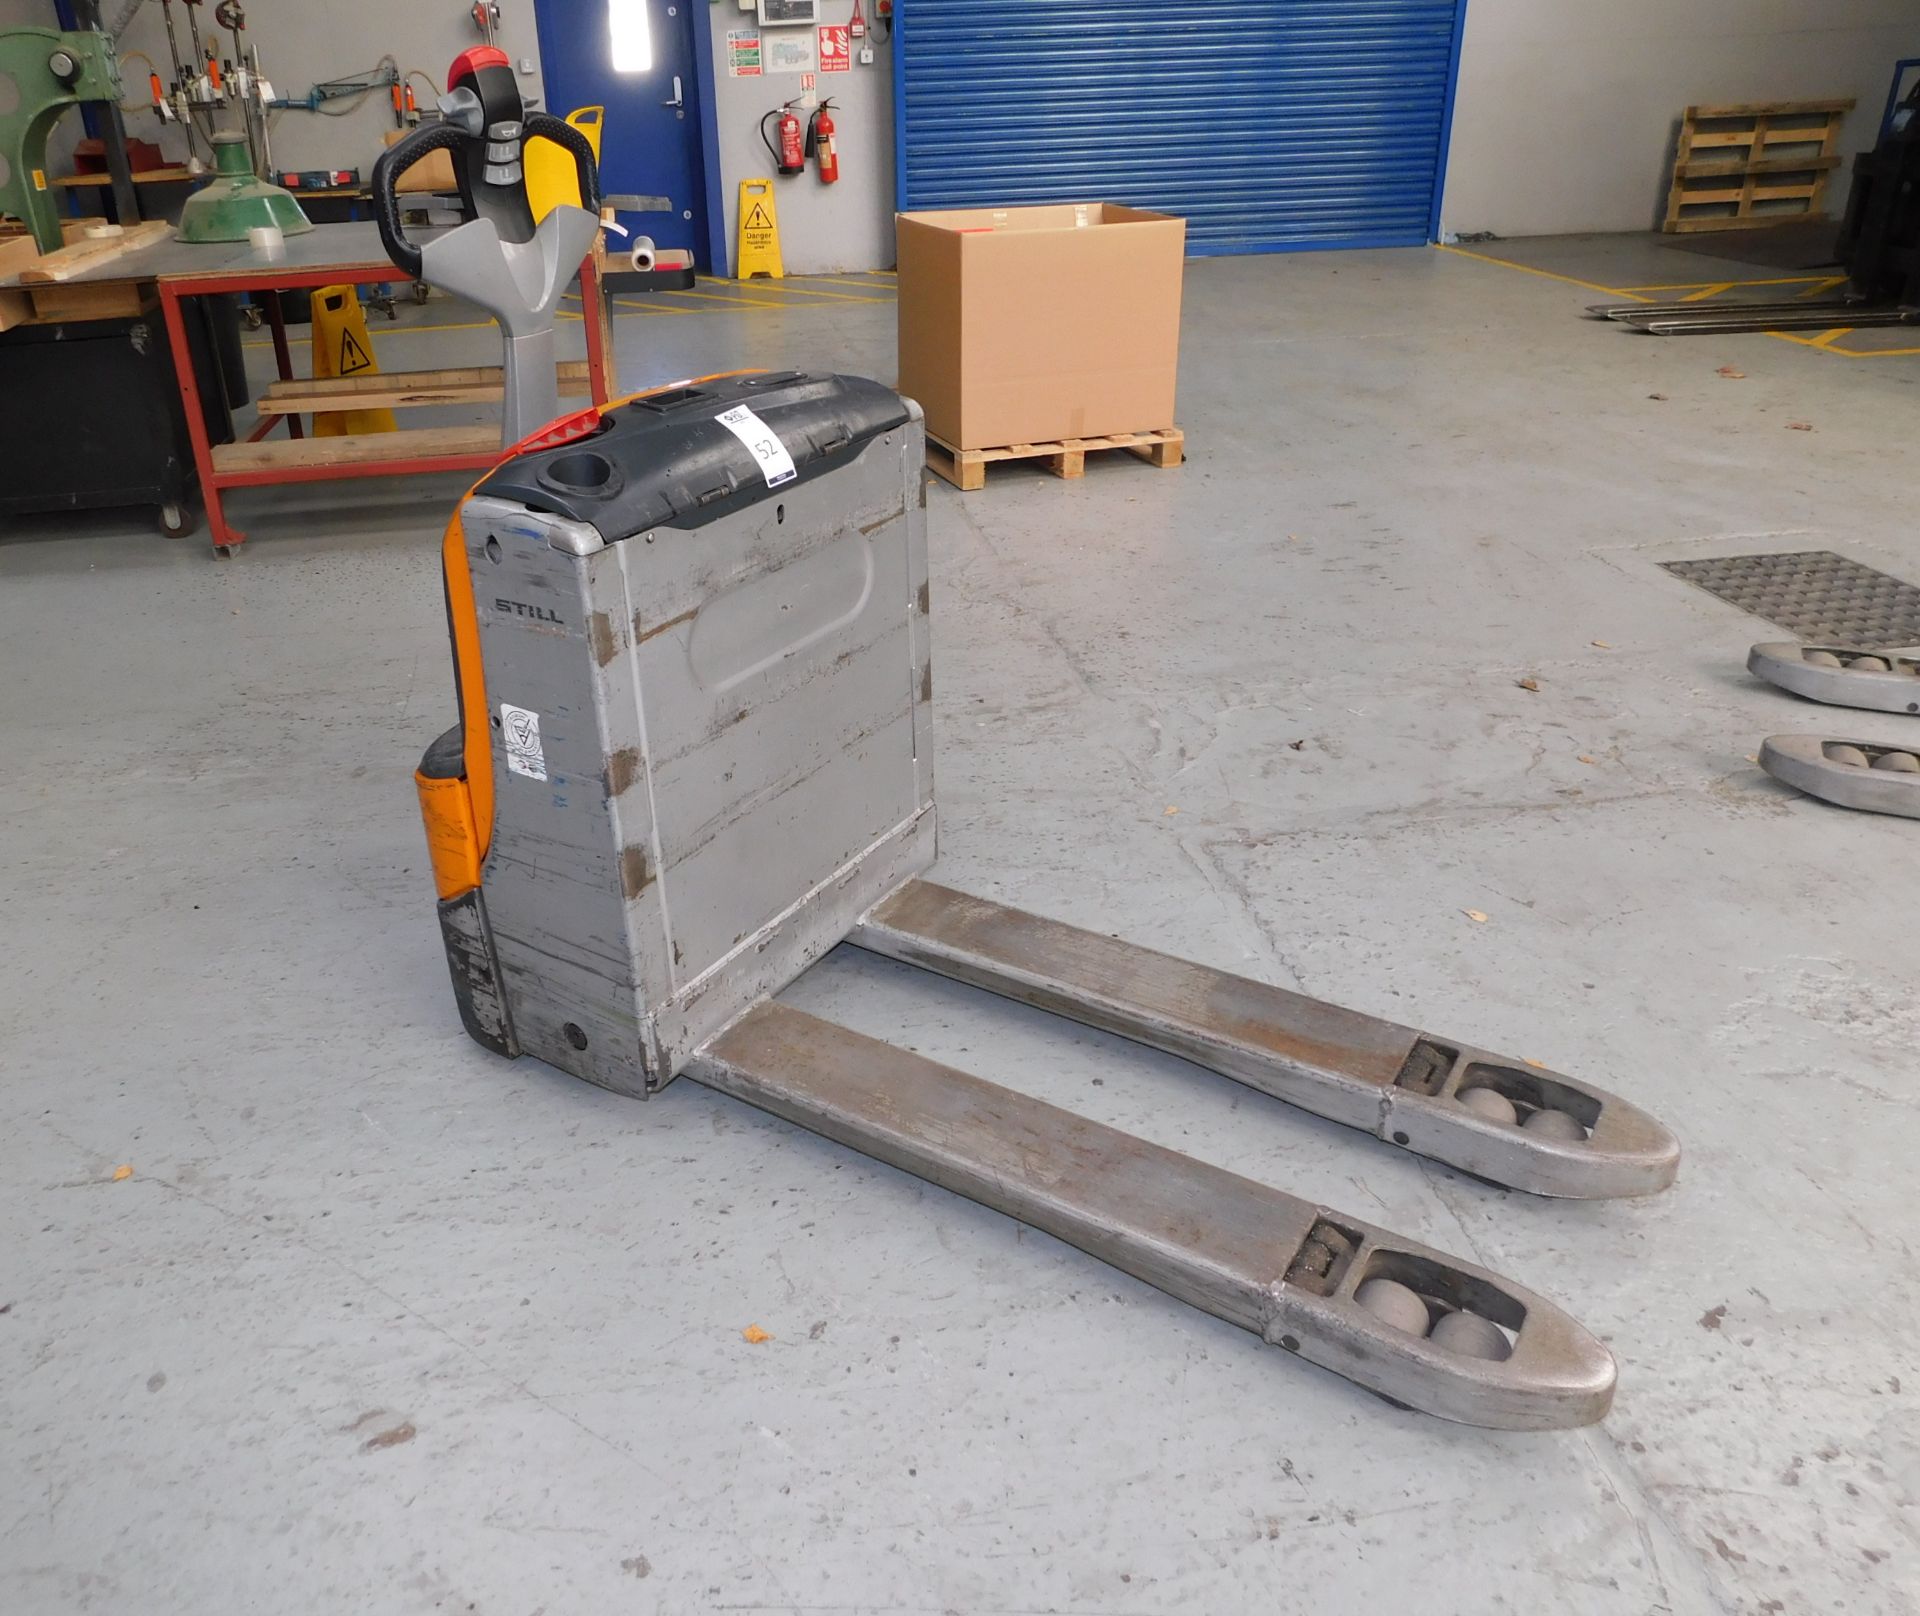 2011 Still EXU18, Pedestrian Operated Electric Pallet Truck, Serial No W40154BO1381, 1800Kg - Image 3 of 8